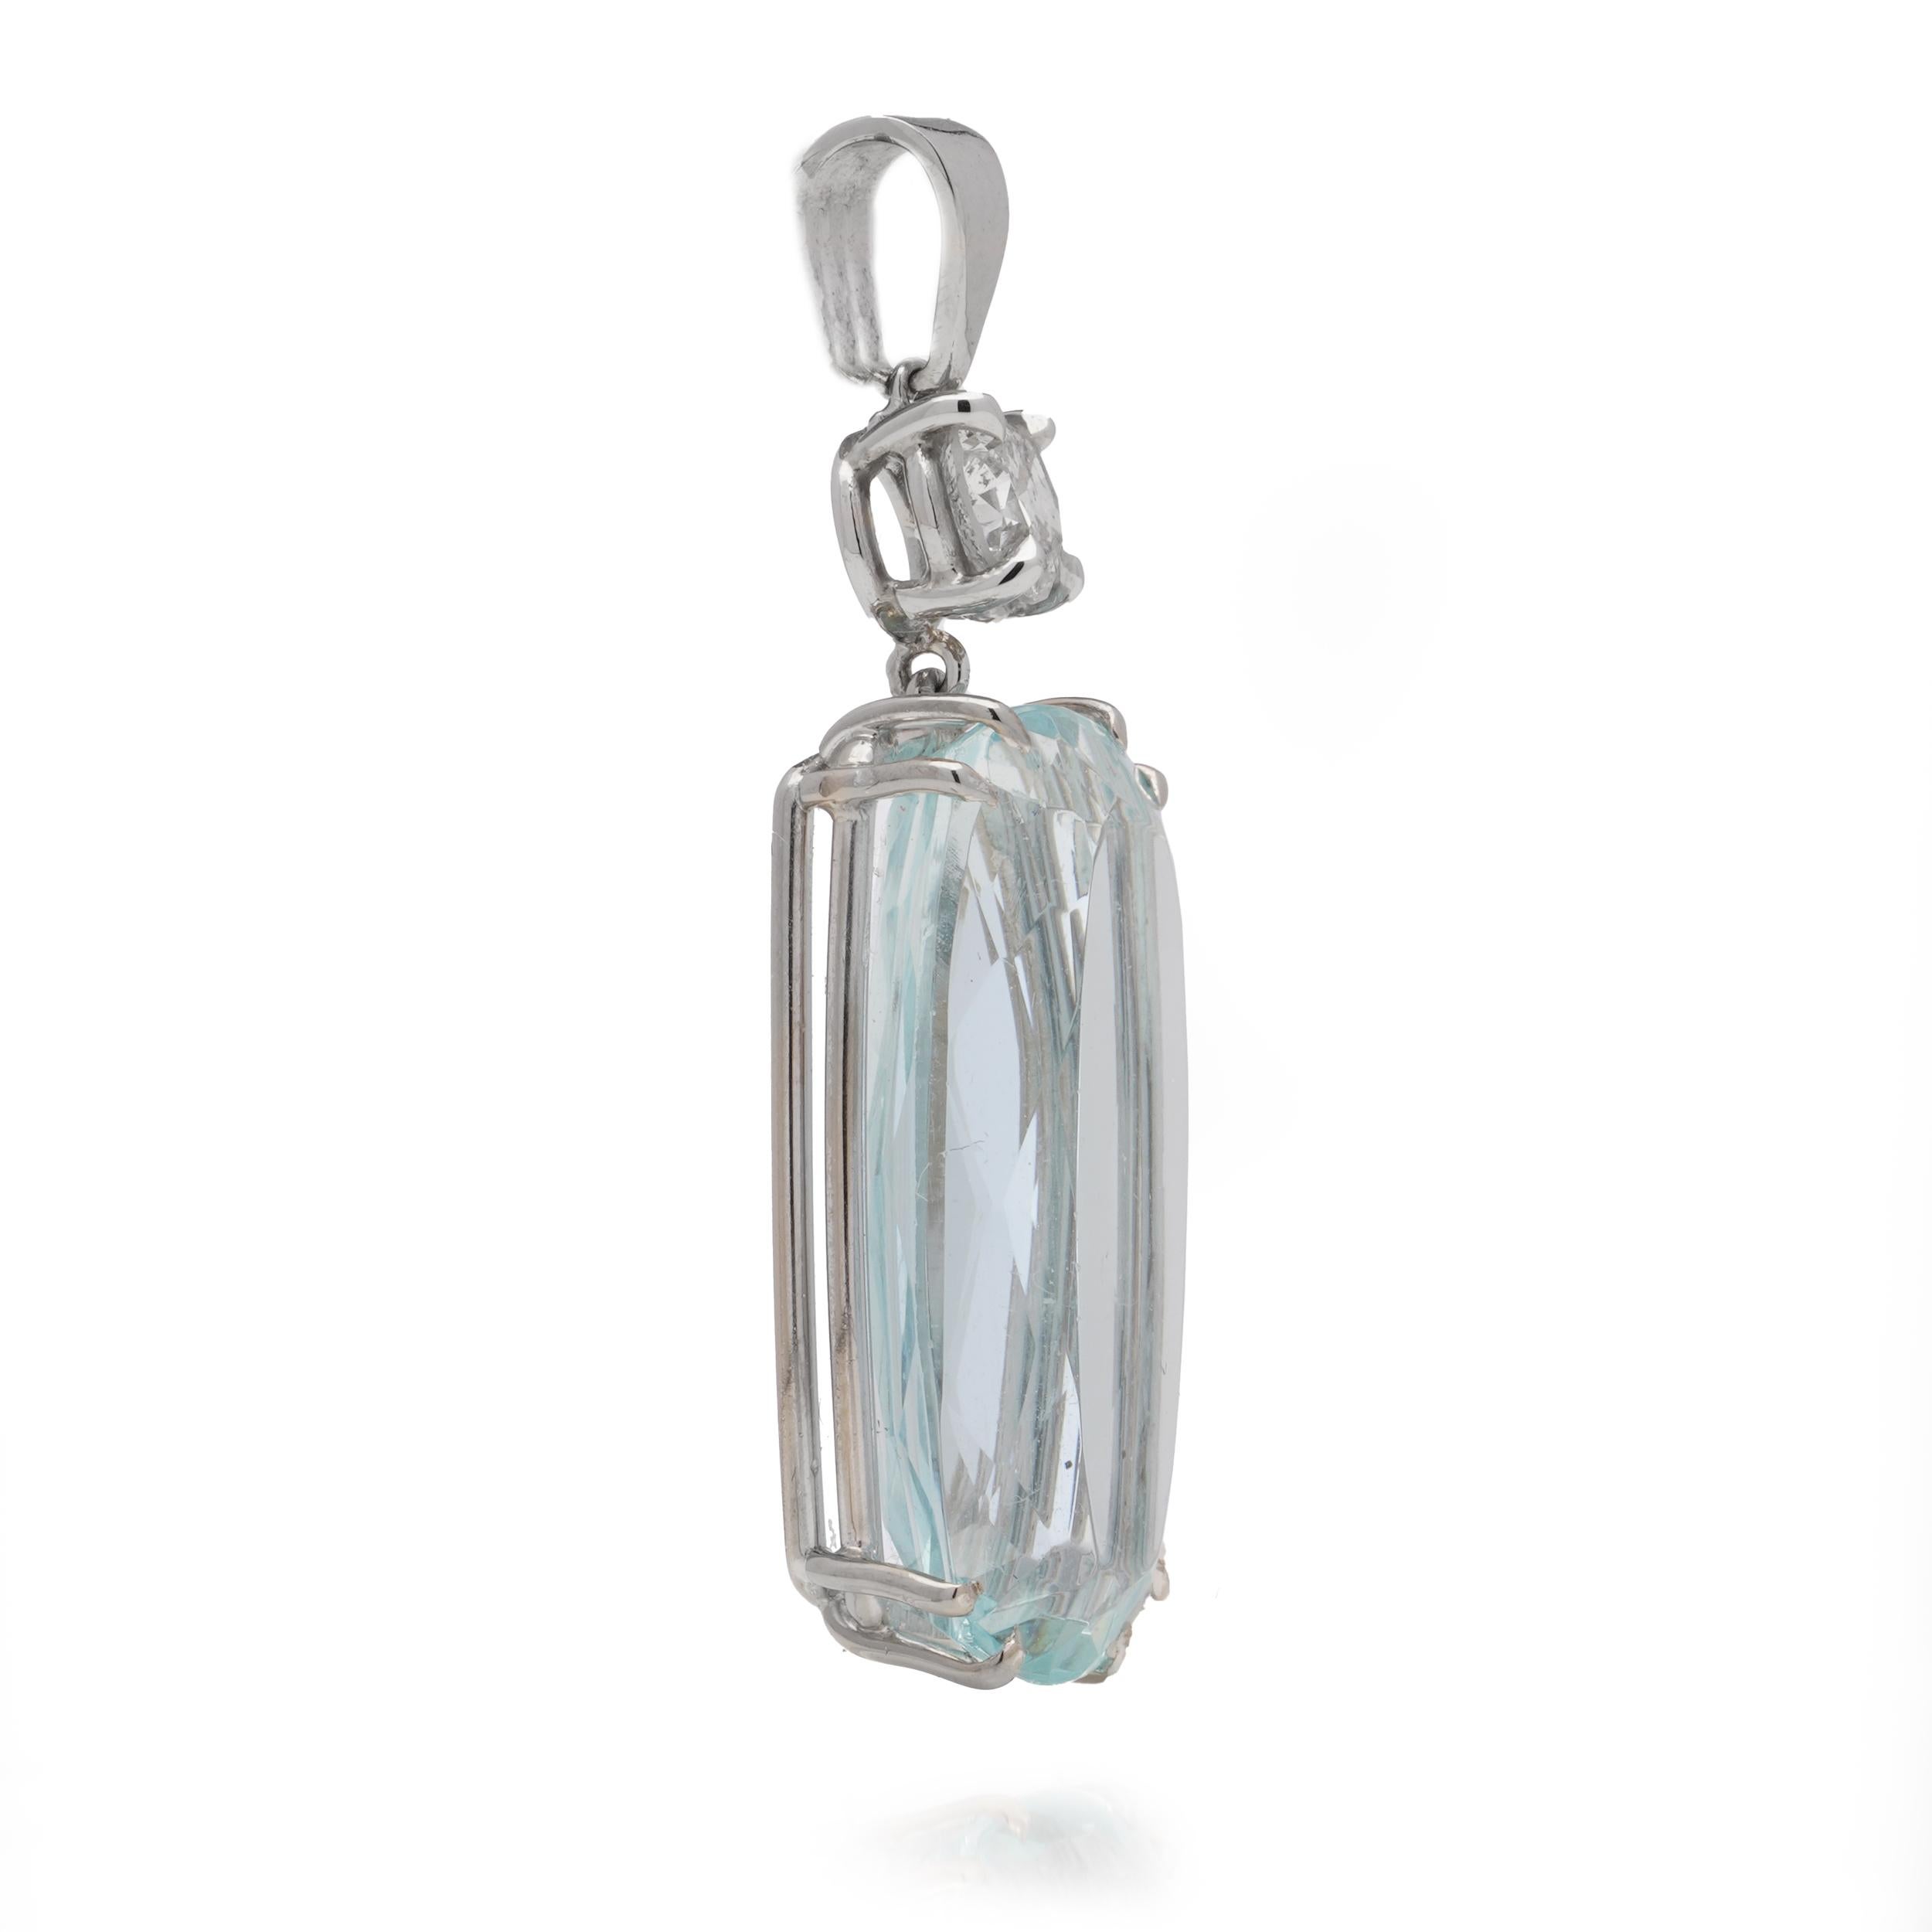 18kt white gold pendant with 8.68 cts Aquamarine and 0.50 carats of round brilli For Sale 1